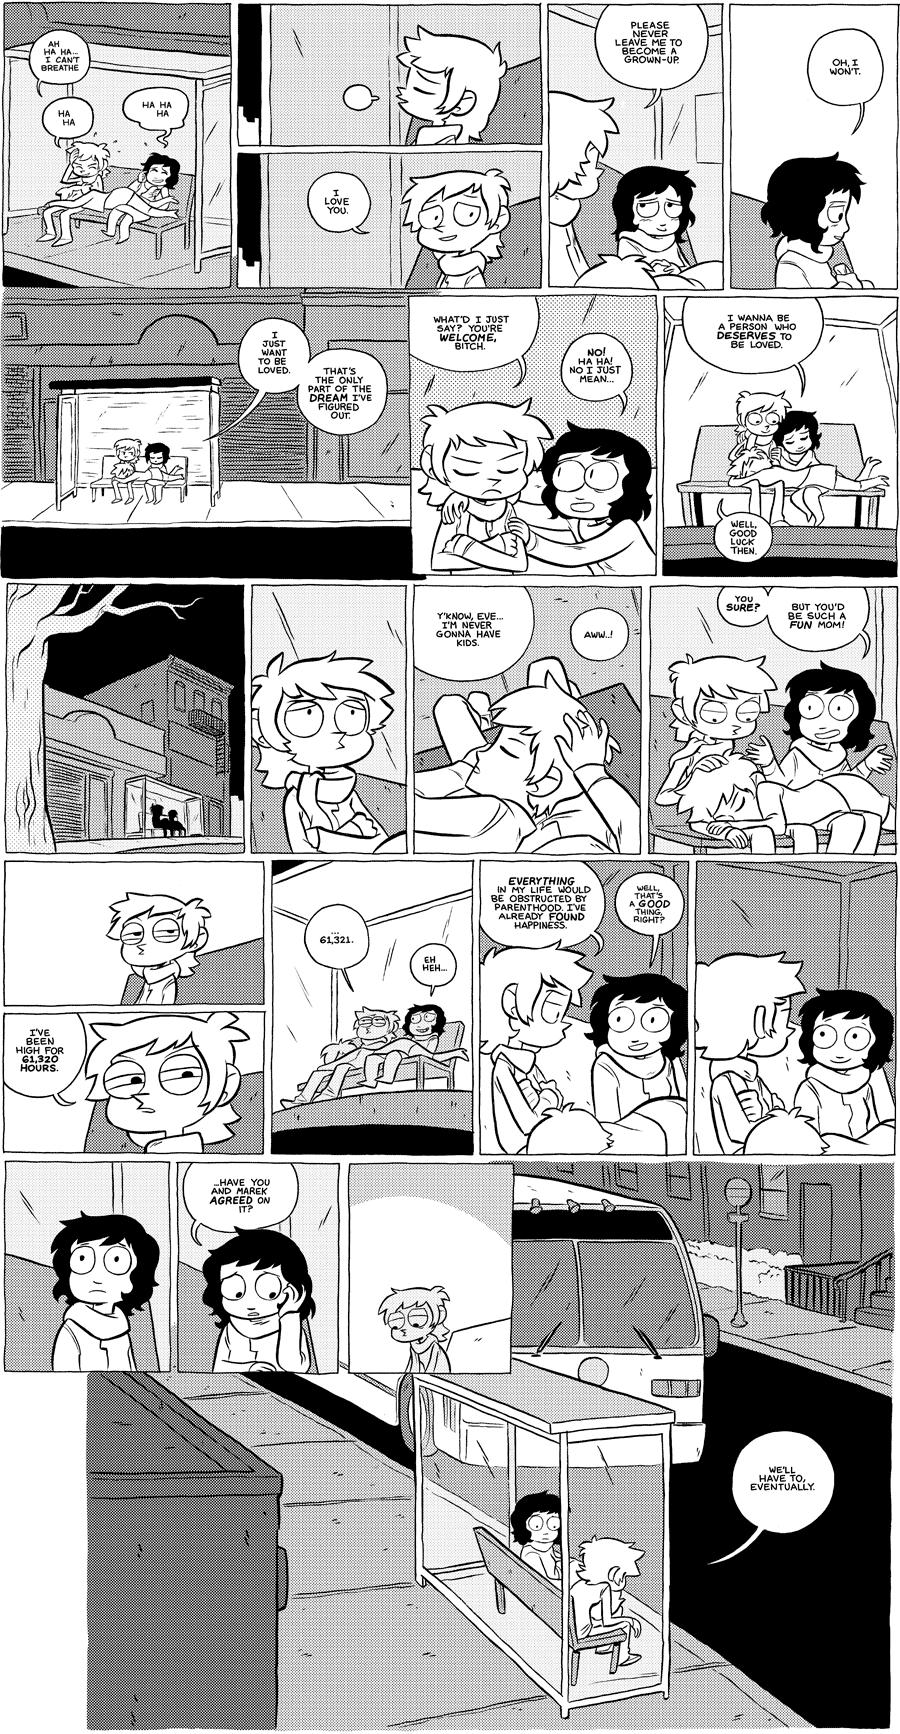 #497 – that’s a good thing